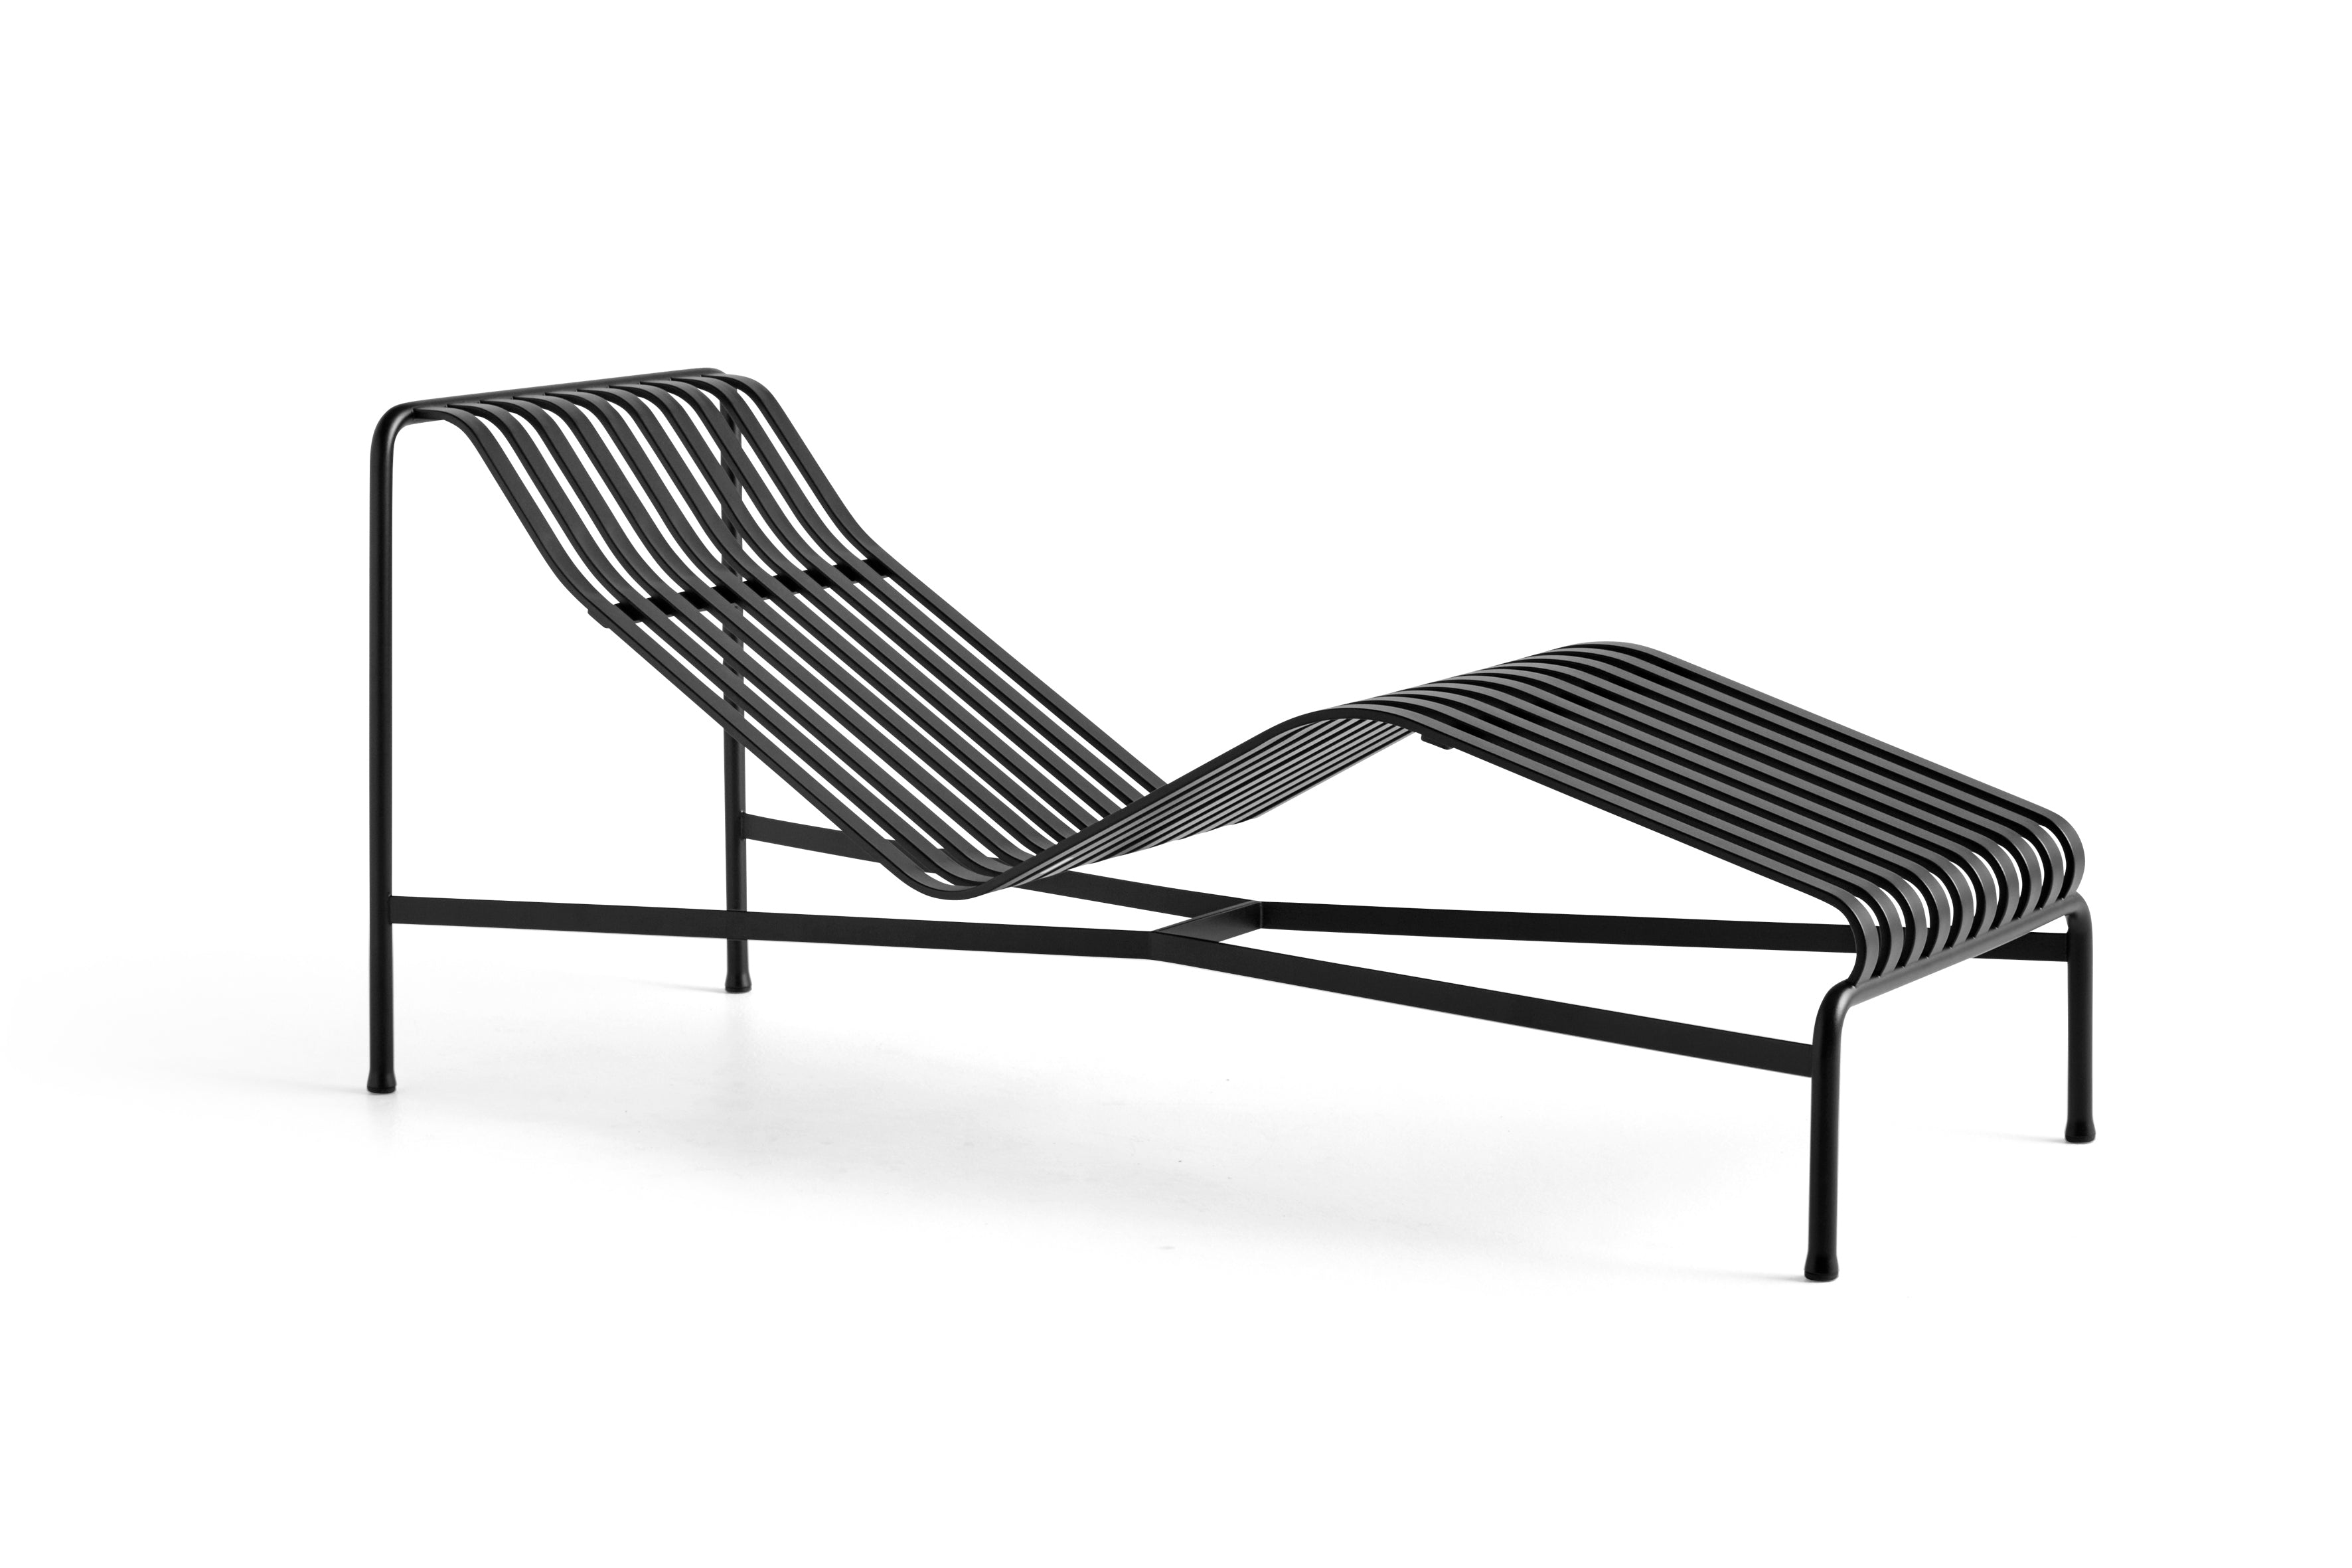 HAY Palissade Chaise Lounge / Sun Lounger